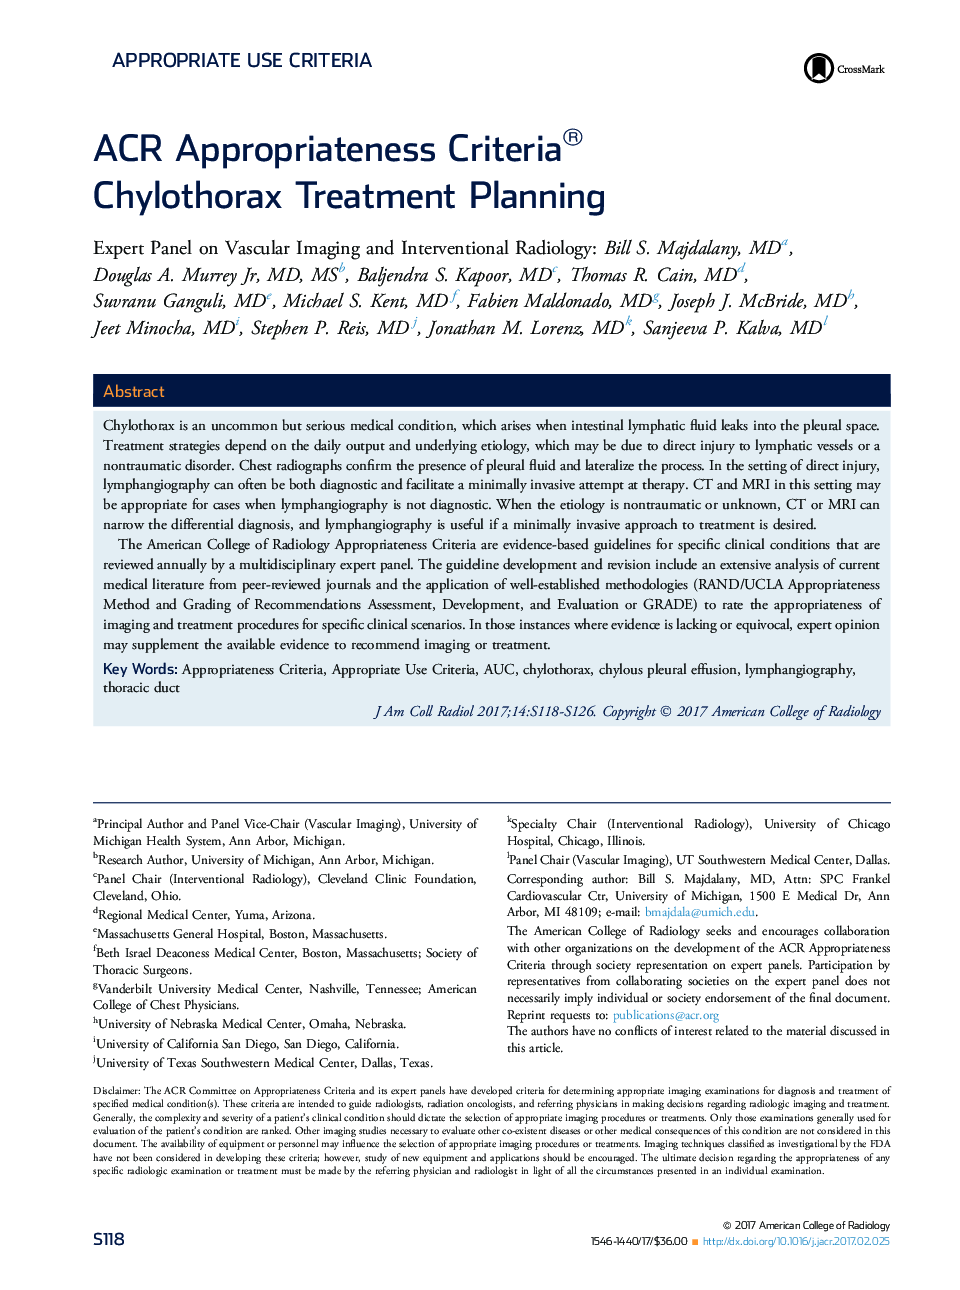 ACR Appropriateness Criteria® Chylothorax Treatment Planning